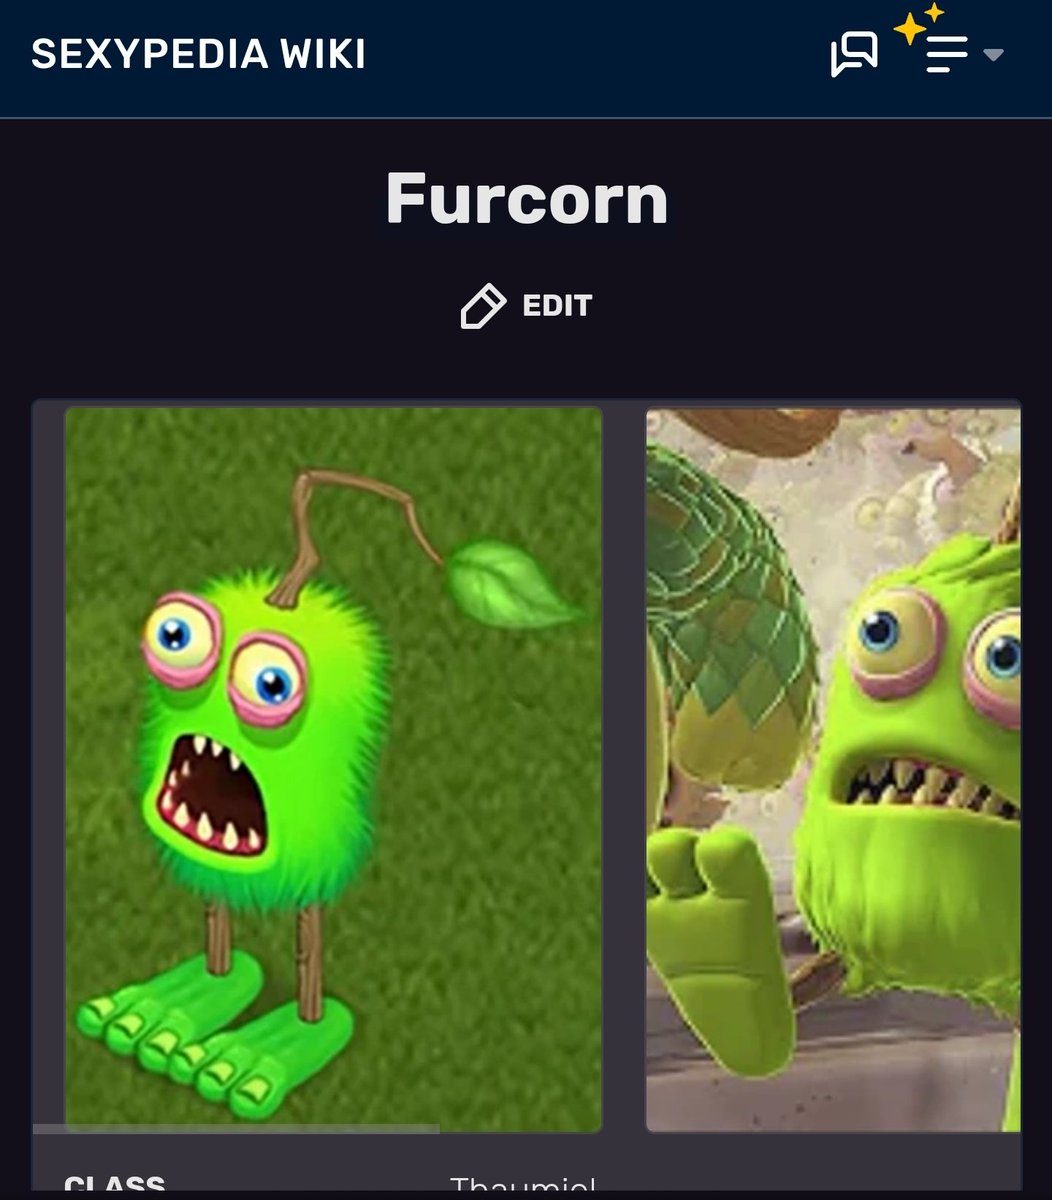 OK. WHICH ONE OF YOU MOTHERFUCKERS WANTED TO FUCK THE FURCORN.